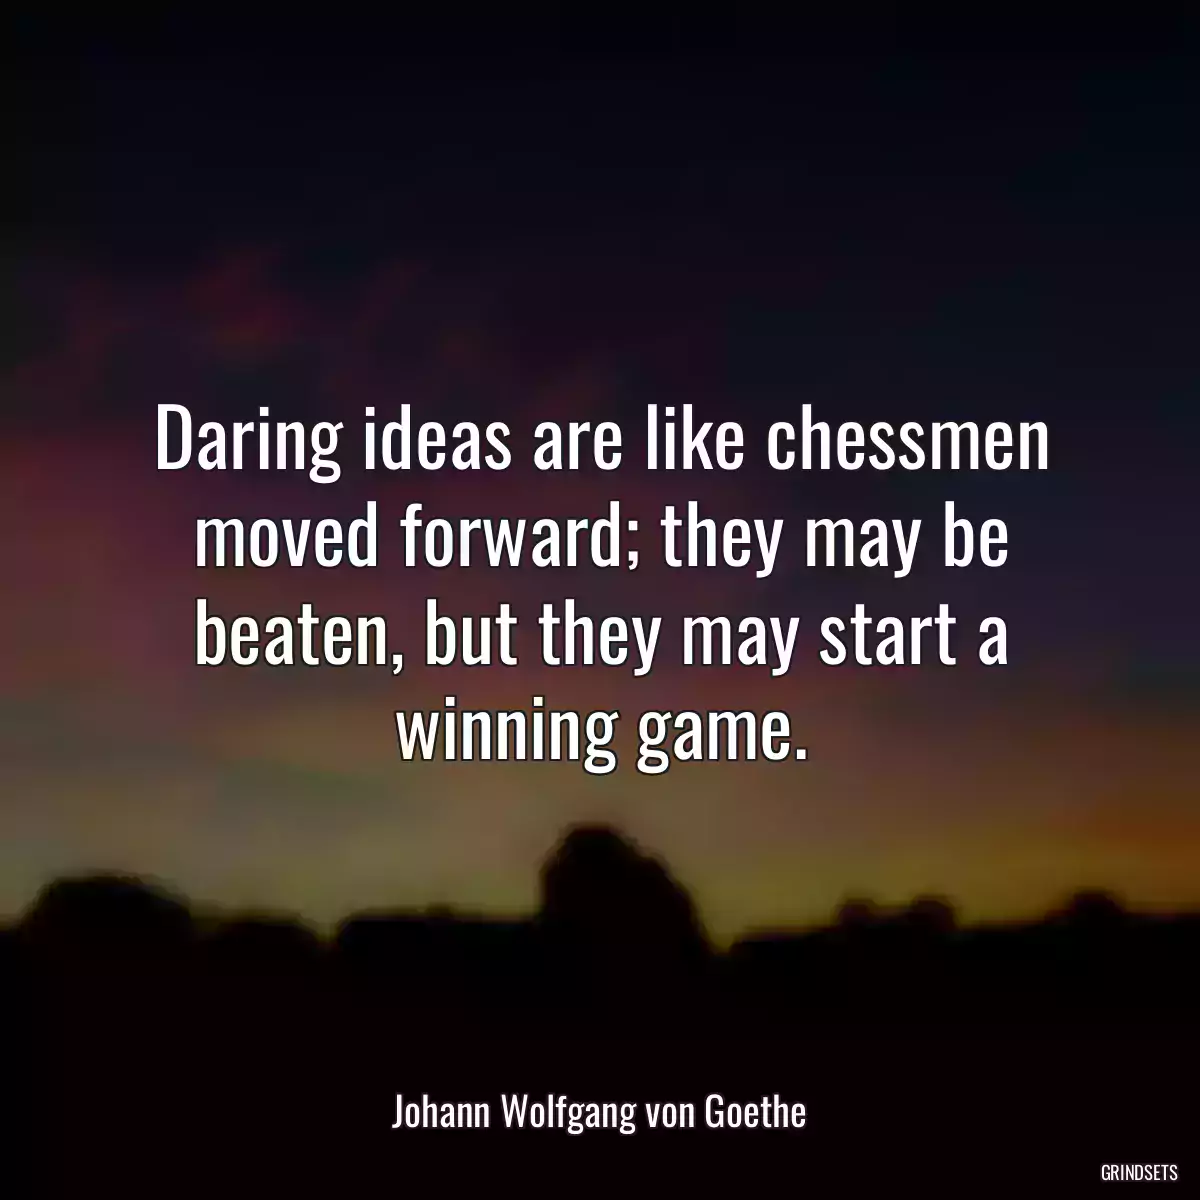 Daring ideas are like chessmen moved forward; they may be beaten, but they may start a winning game.